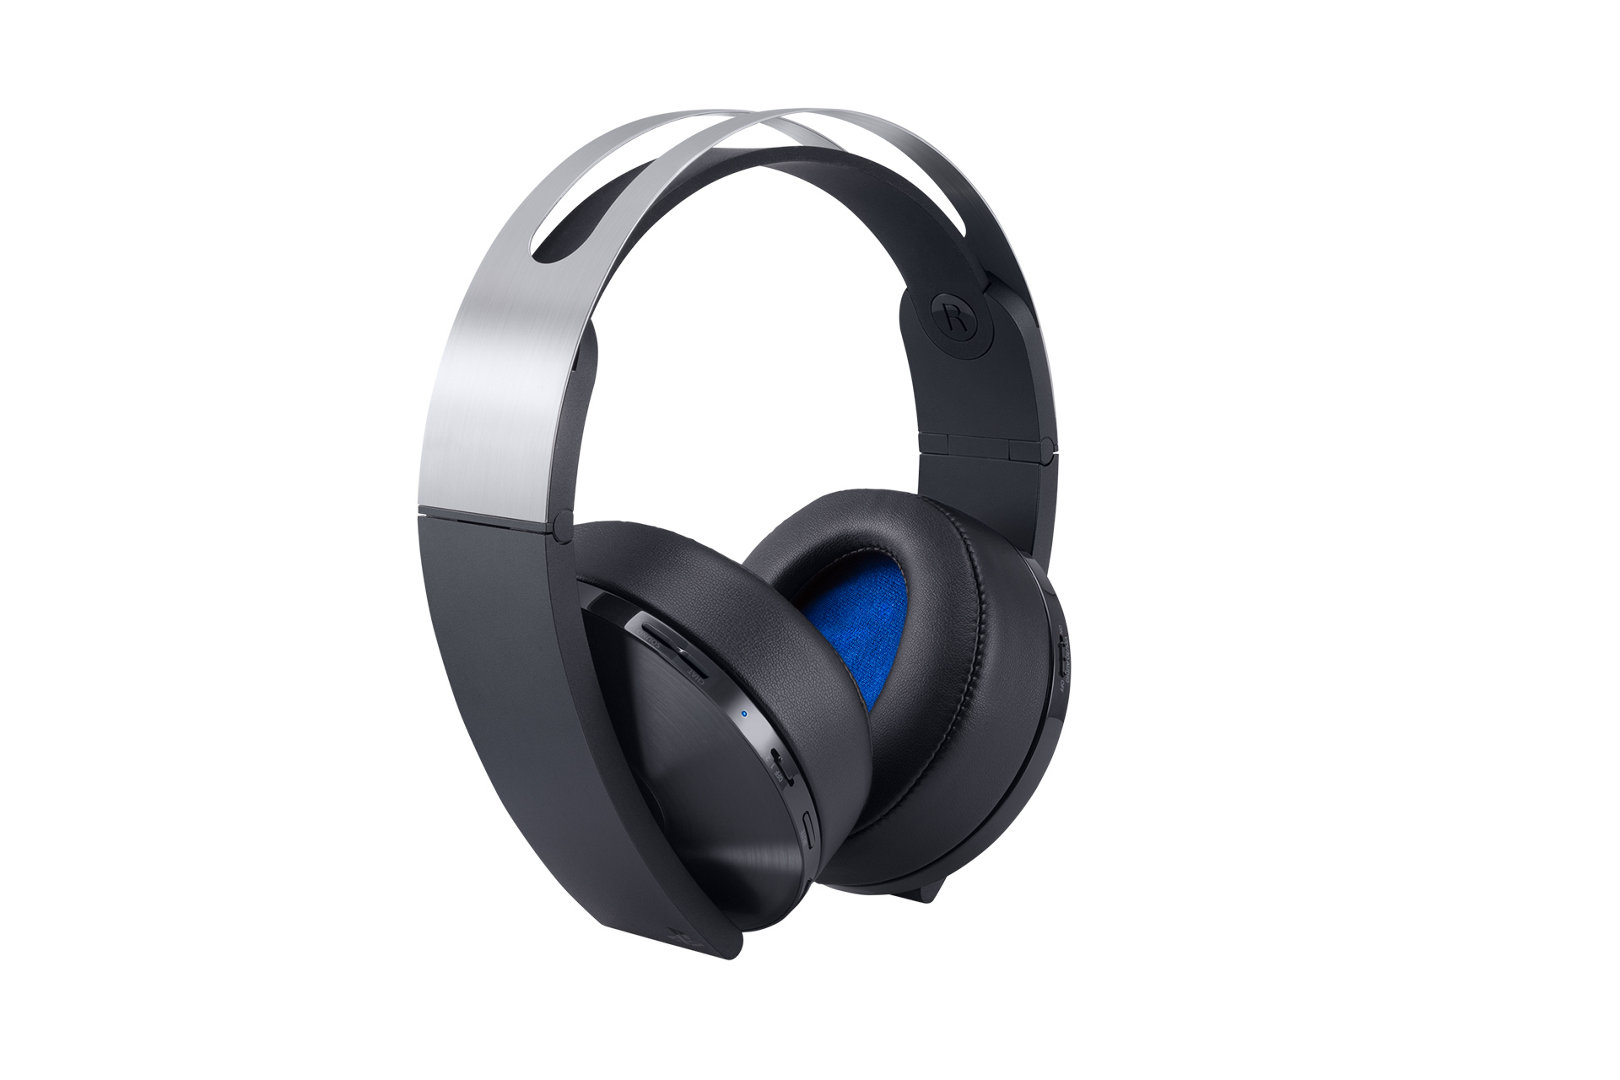 Sony Platinum Wireless Headset for PlayStation 4